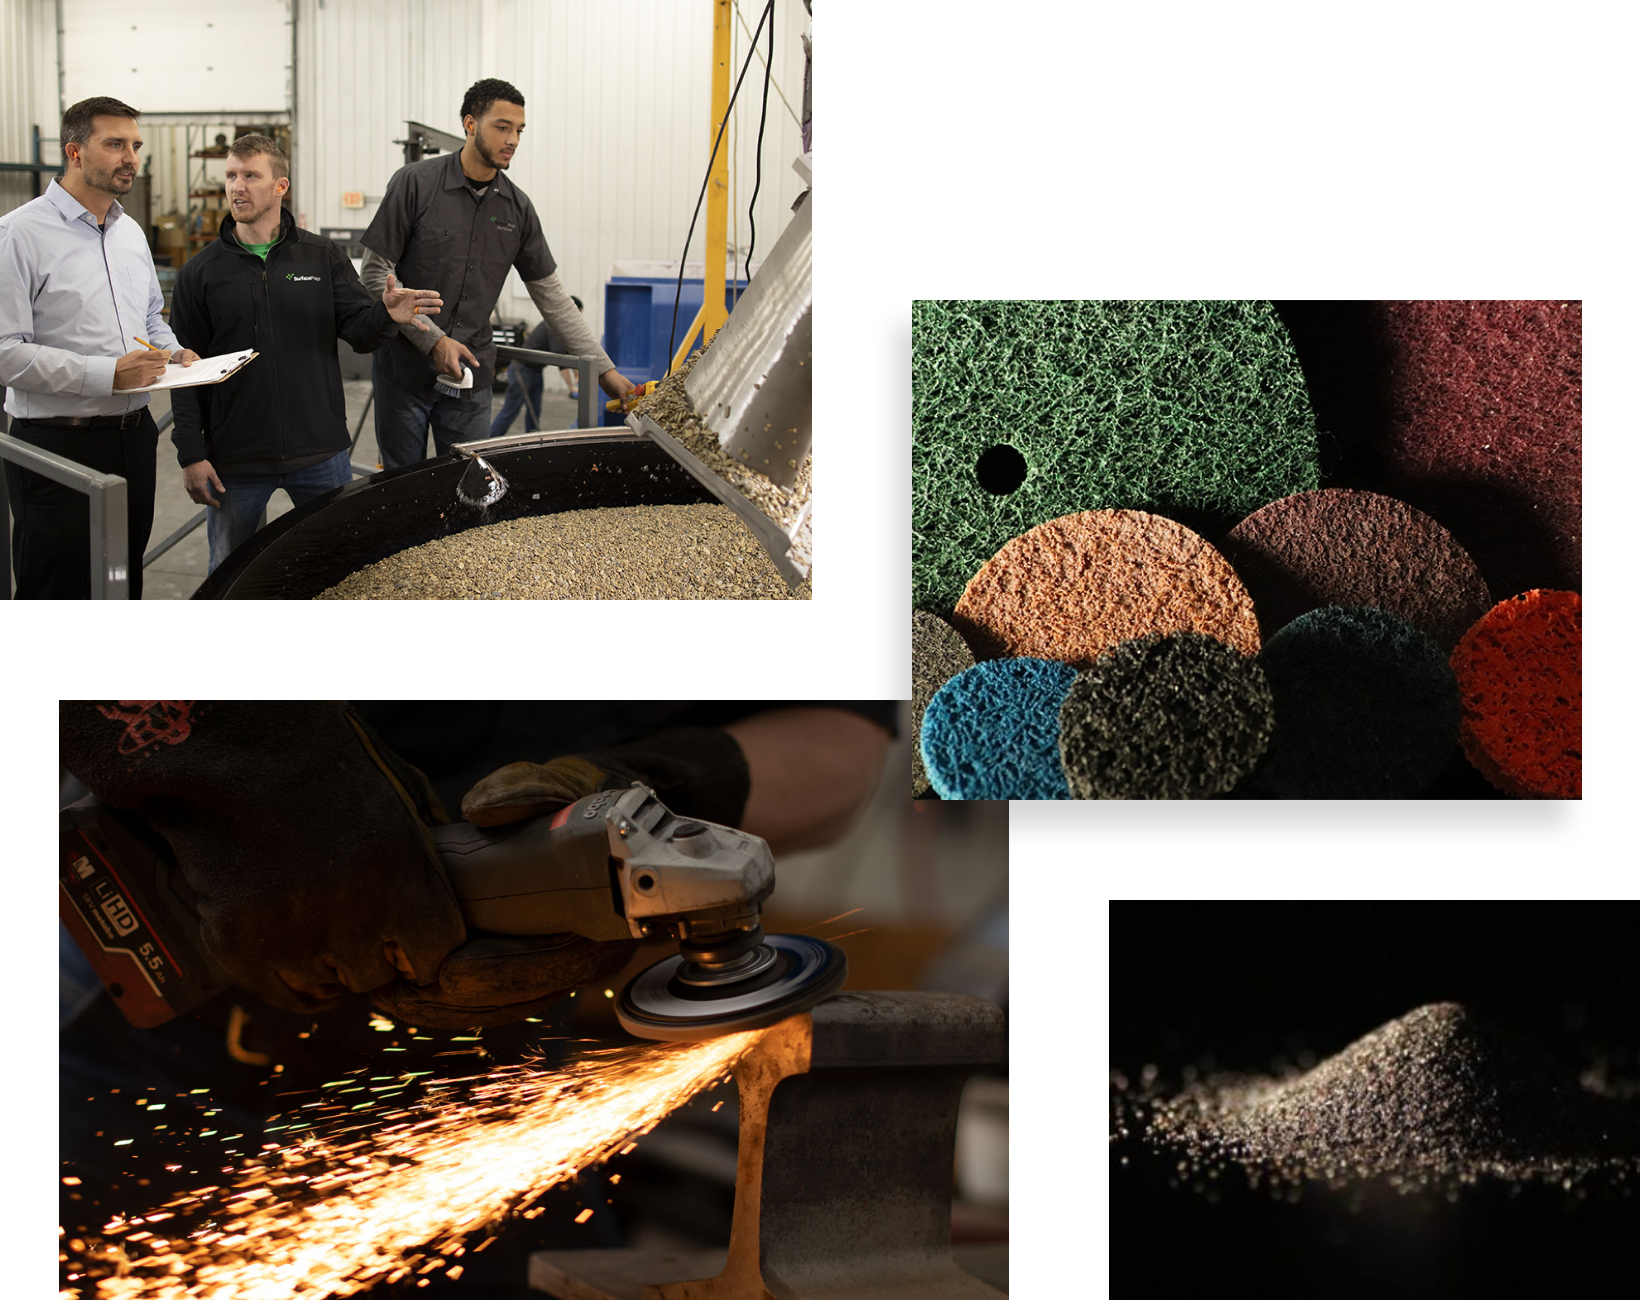 Four SurfacePrep Action Shots (TopLeft) SurfacePrep Employees taking notes on duty; (TopRight) multiple texture examples; (BottomLeft) Active tool creating sparks off of metal its grinding against; (BottomRight) Pile of Grains in dark with natural light shining on it.